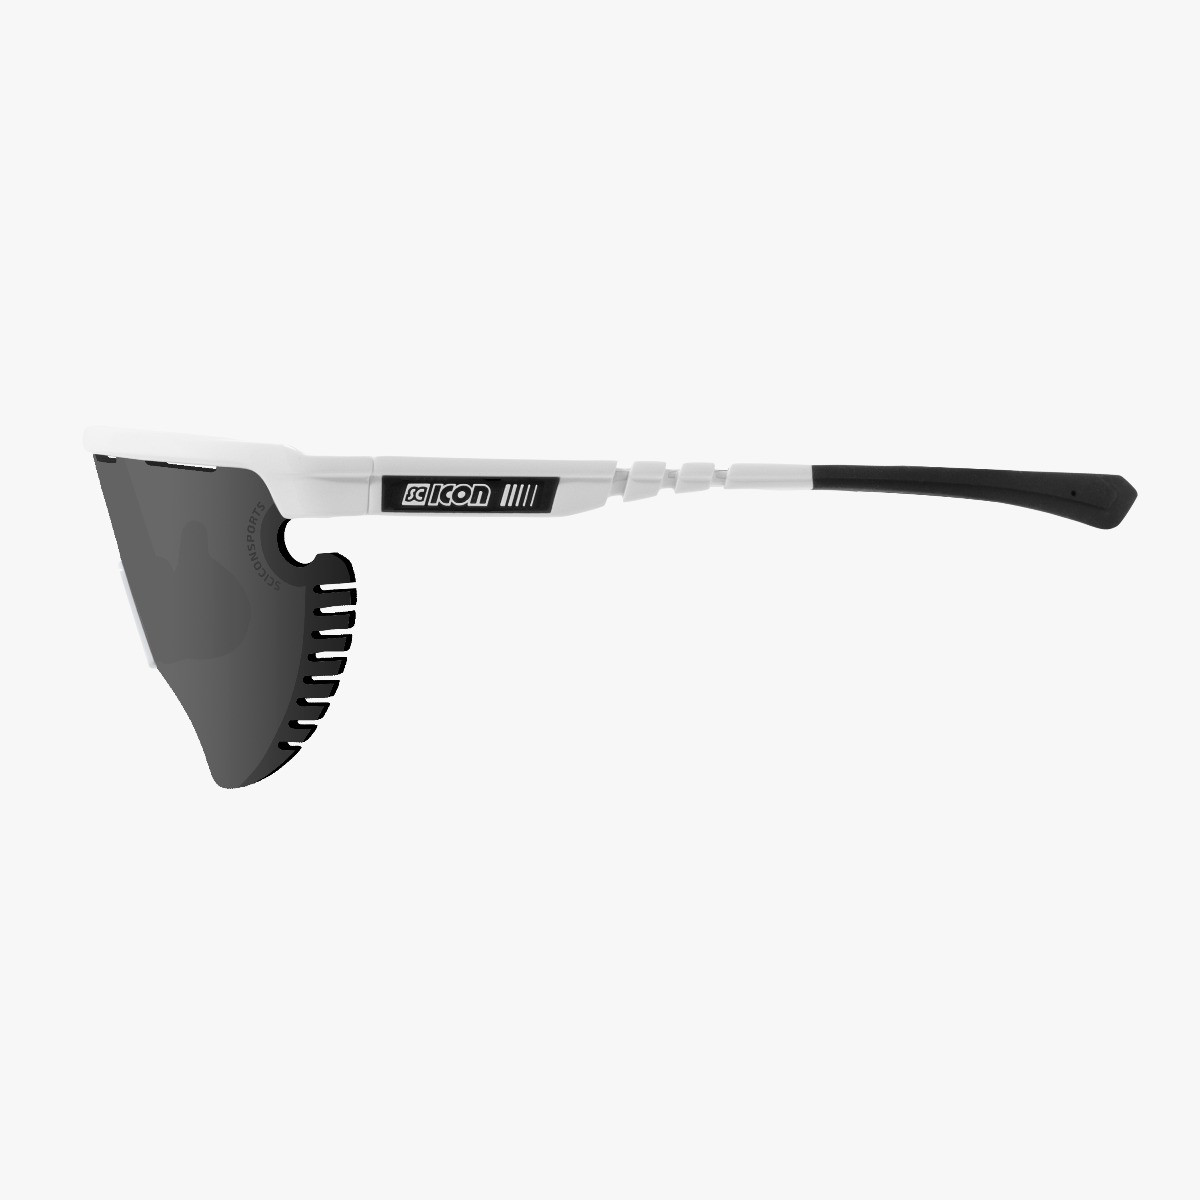 Scicon Sports | Aerowing Lamon Sport Performance Sunglasses - White Gloss / Photocromatic Silver - EY30010800